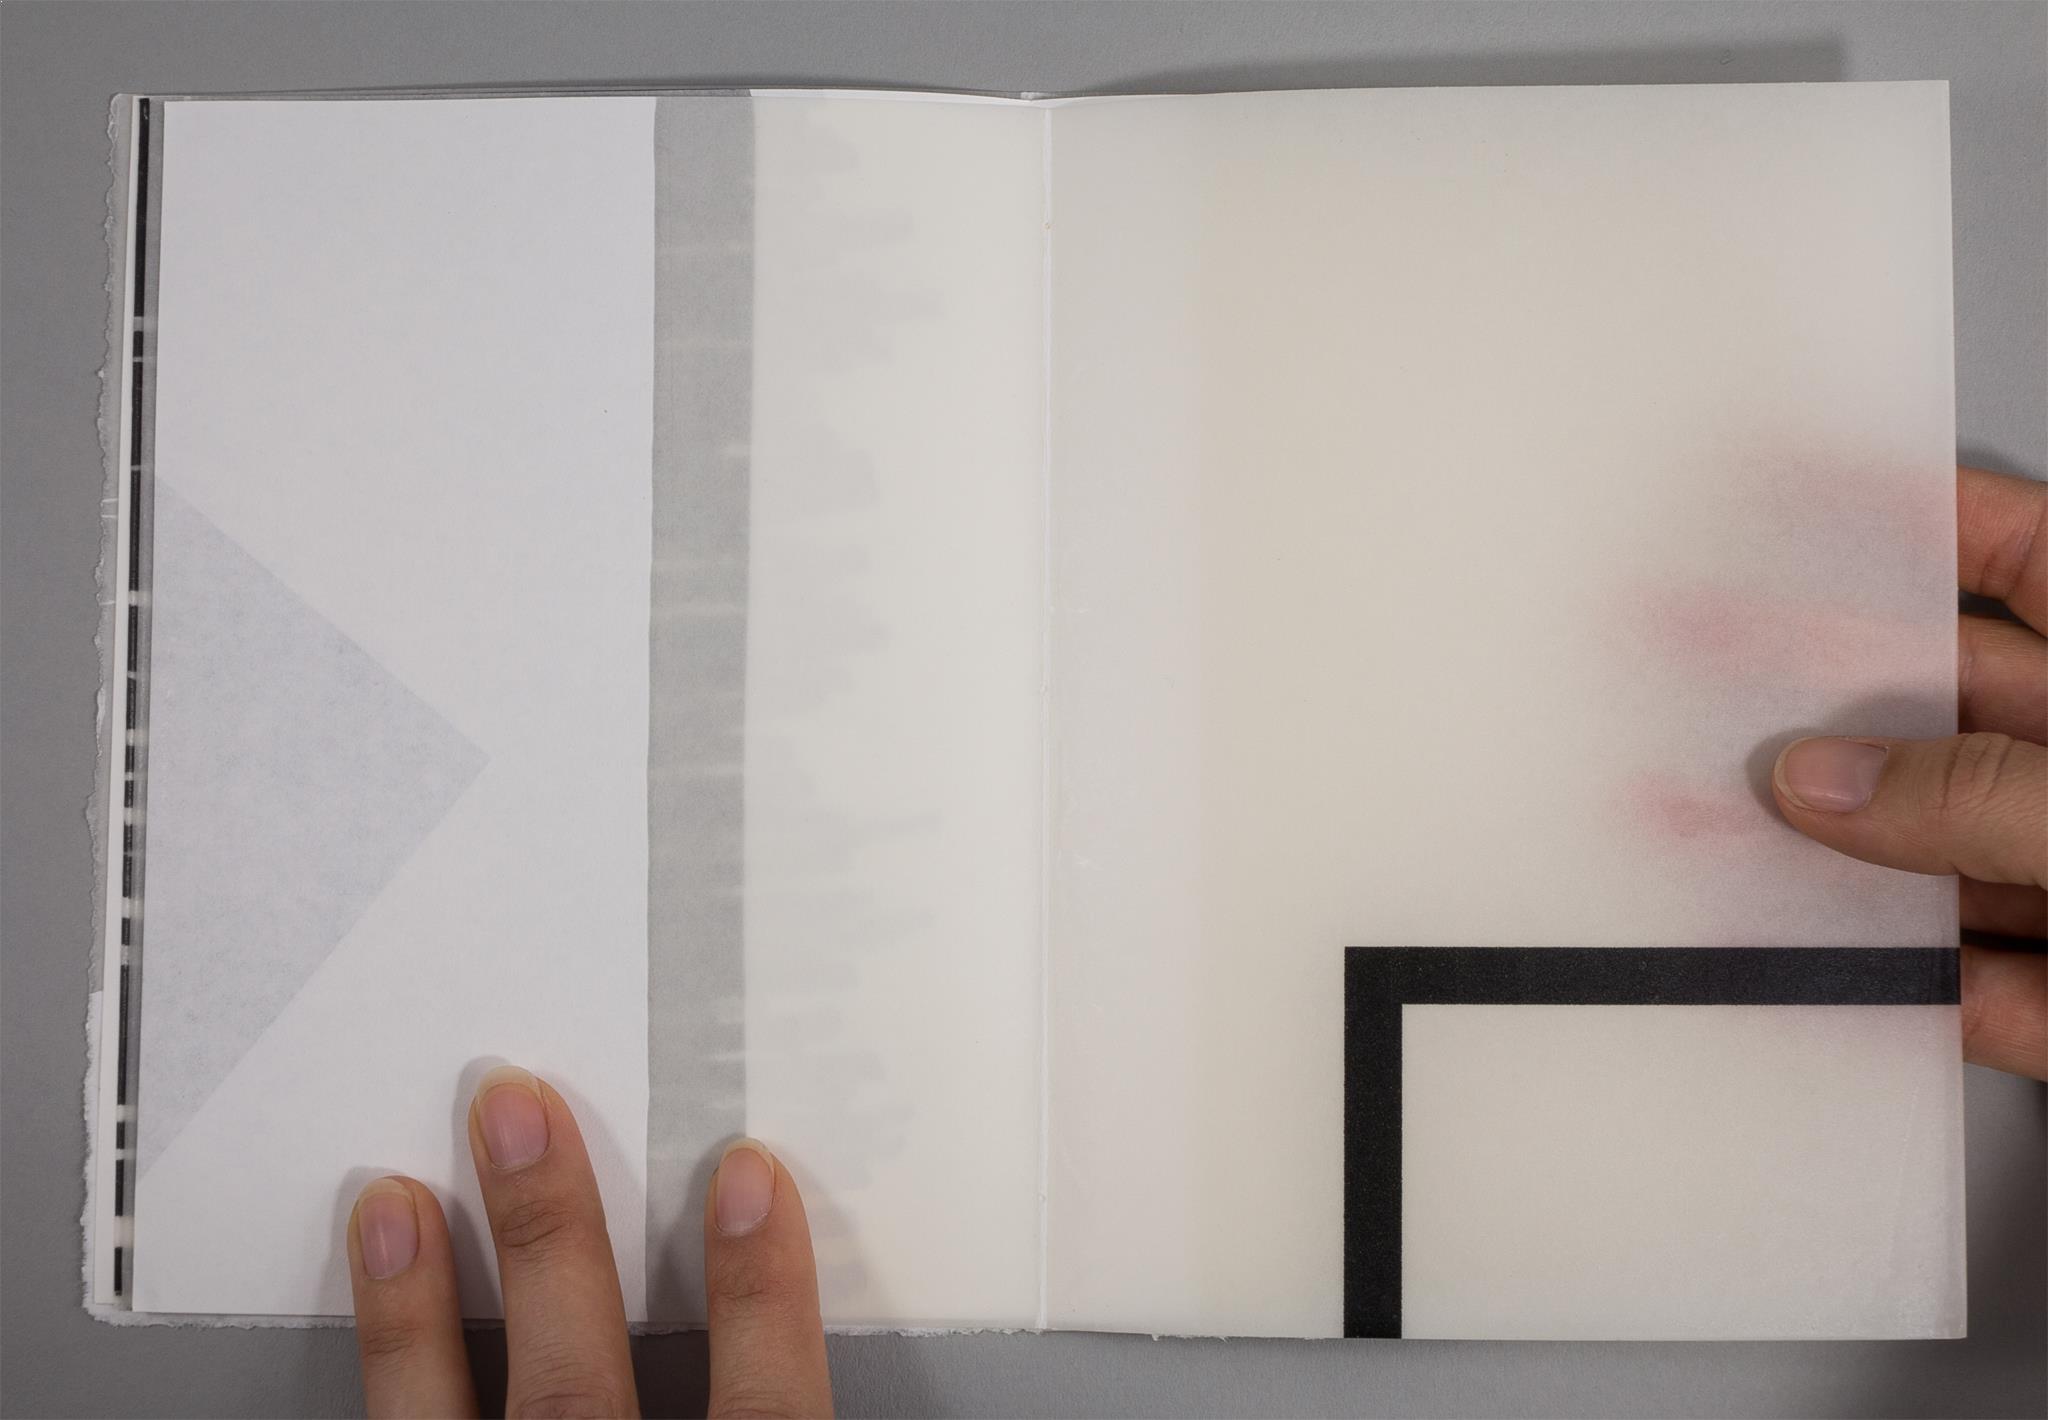 Artists book by Karen Bleitz created from paper, pencil and hot wax. With powerful simplicity this book takes us into the plexus of reading, printing and being.